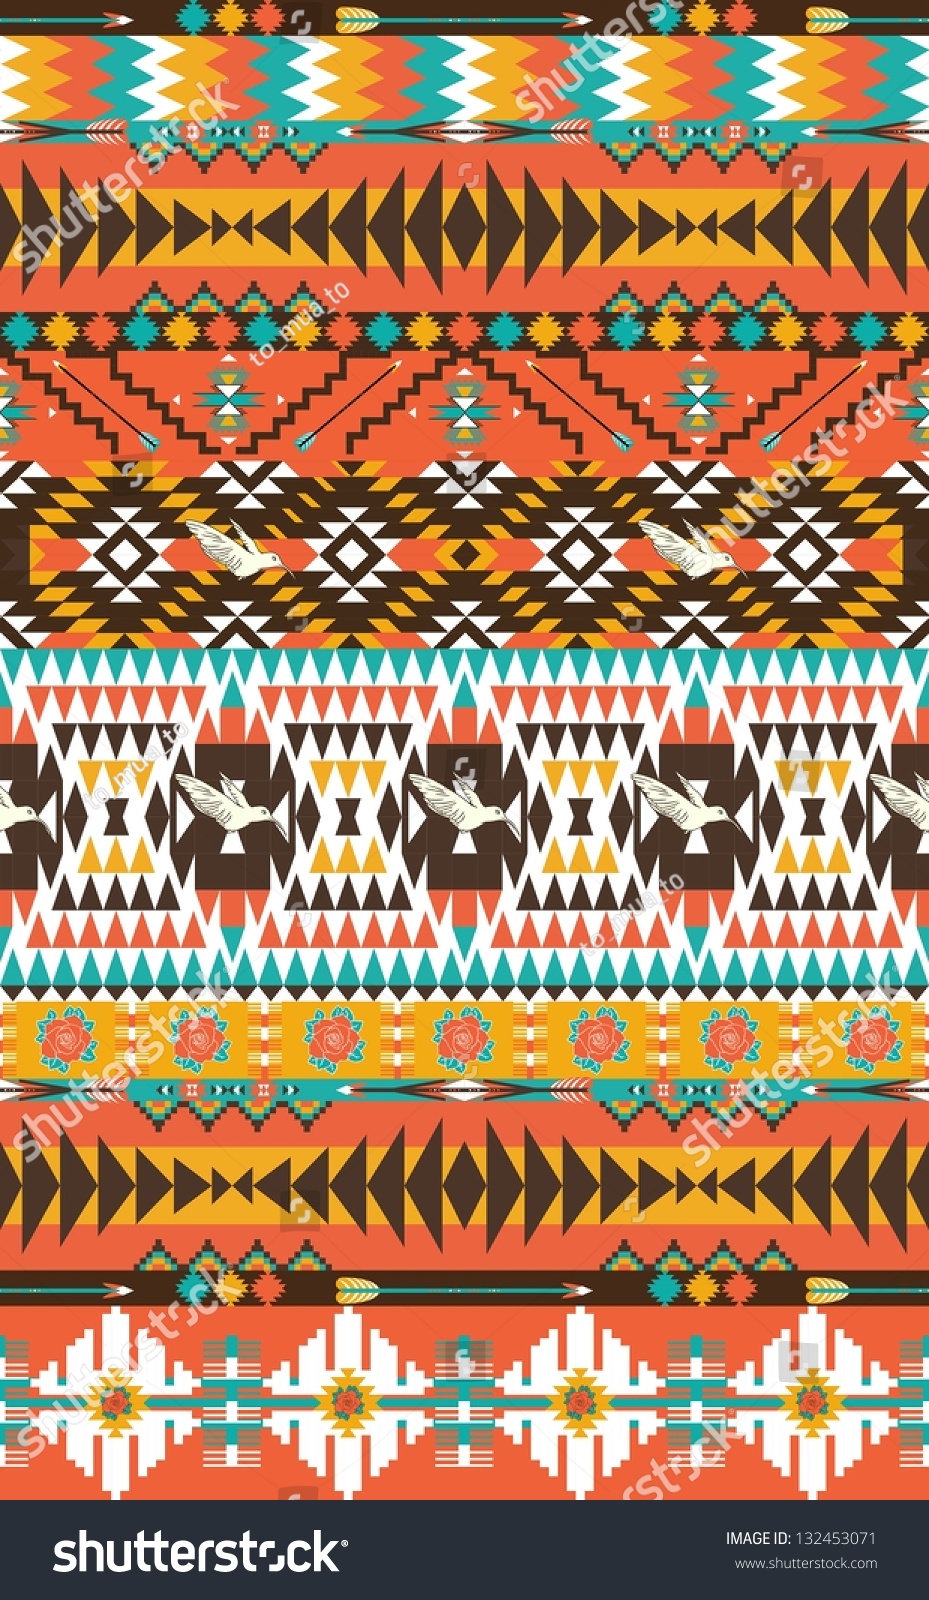 Seamless Colorful Aztec Pattern Stock Vector Illustration 132453071 ...